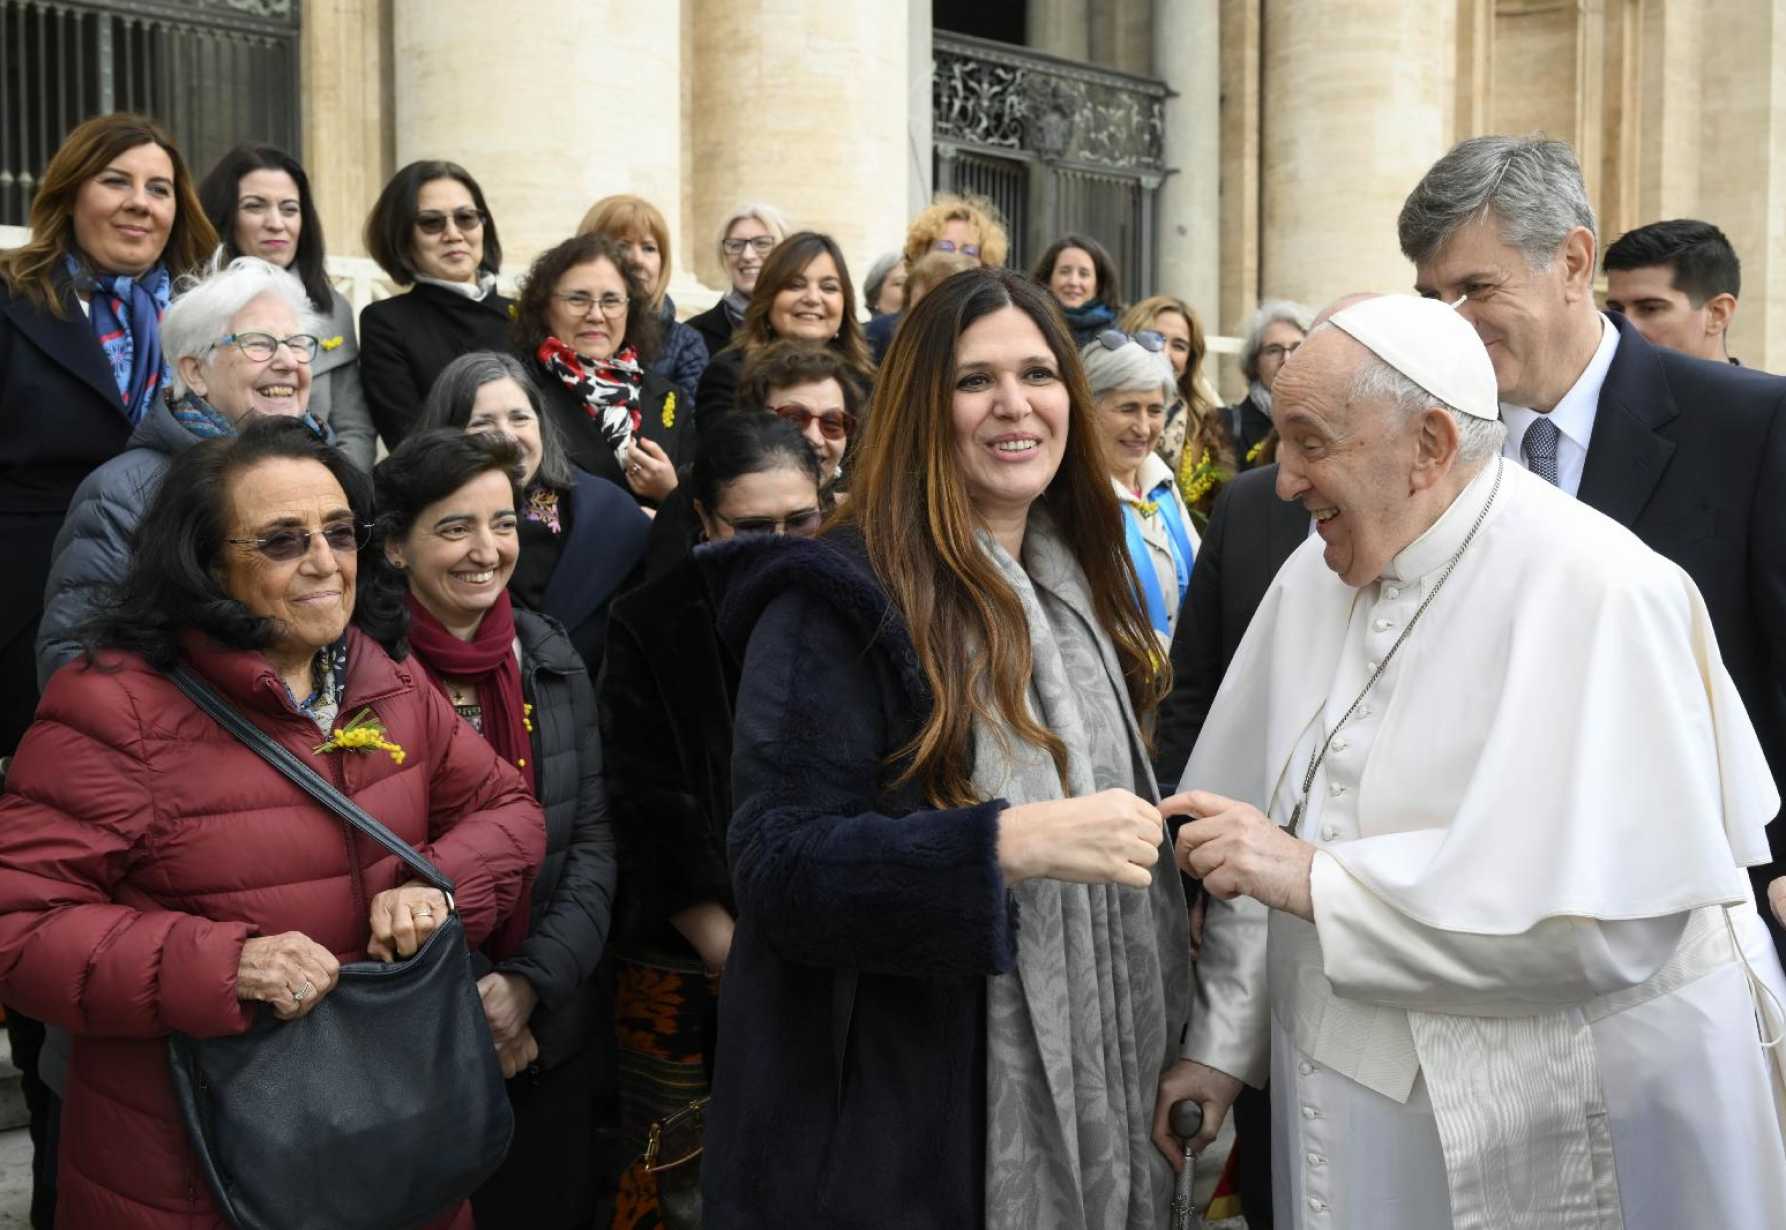 Women's way: Pope opens path for more women at Vatican, in church